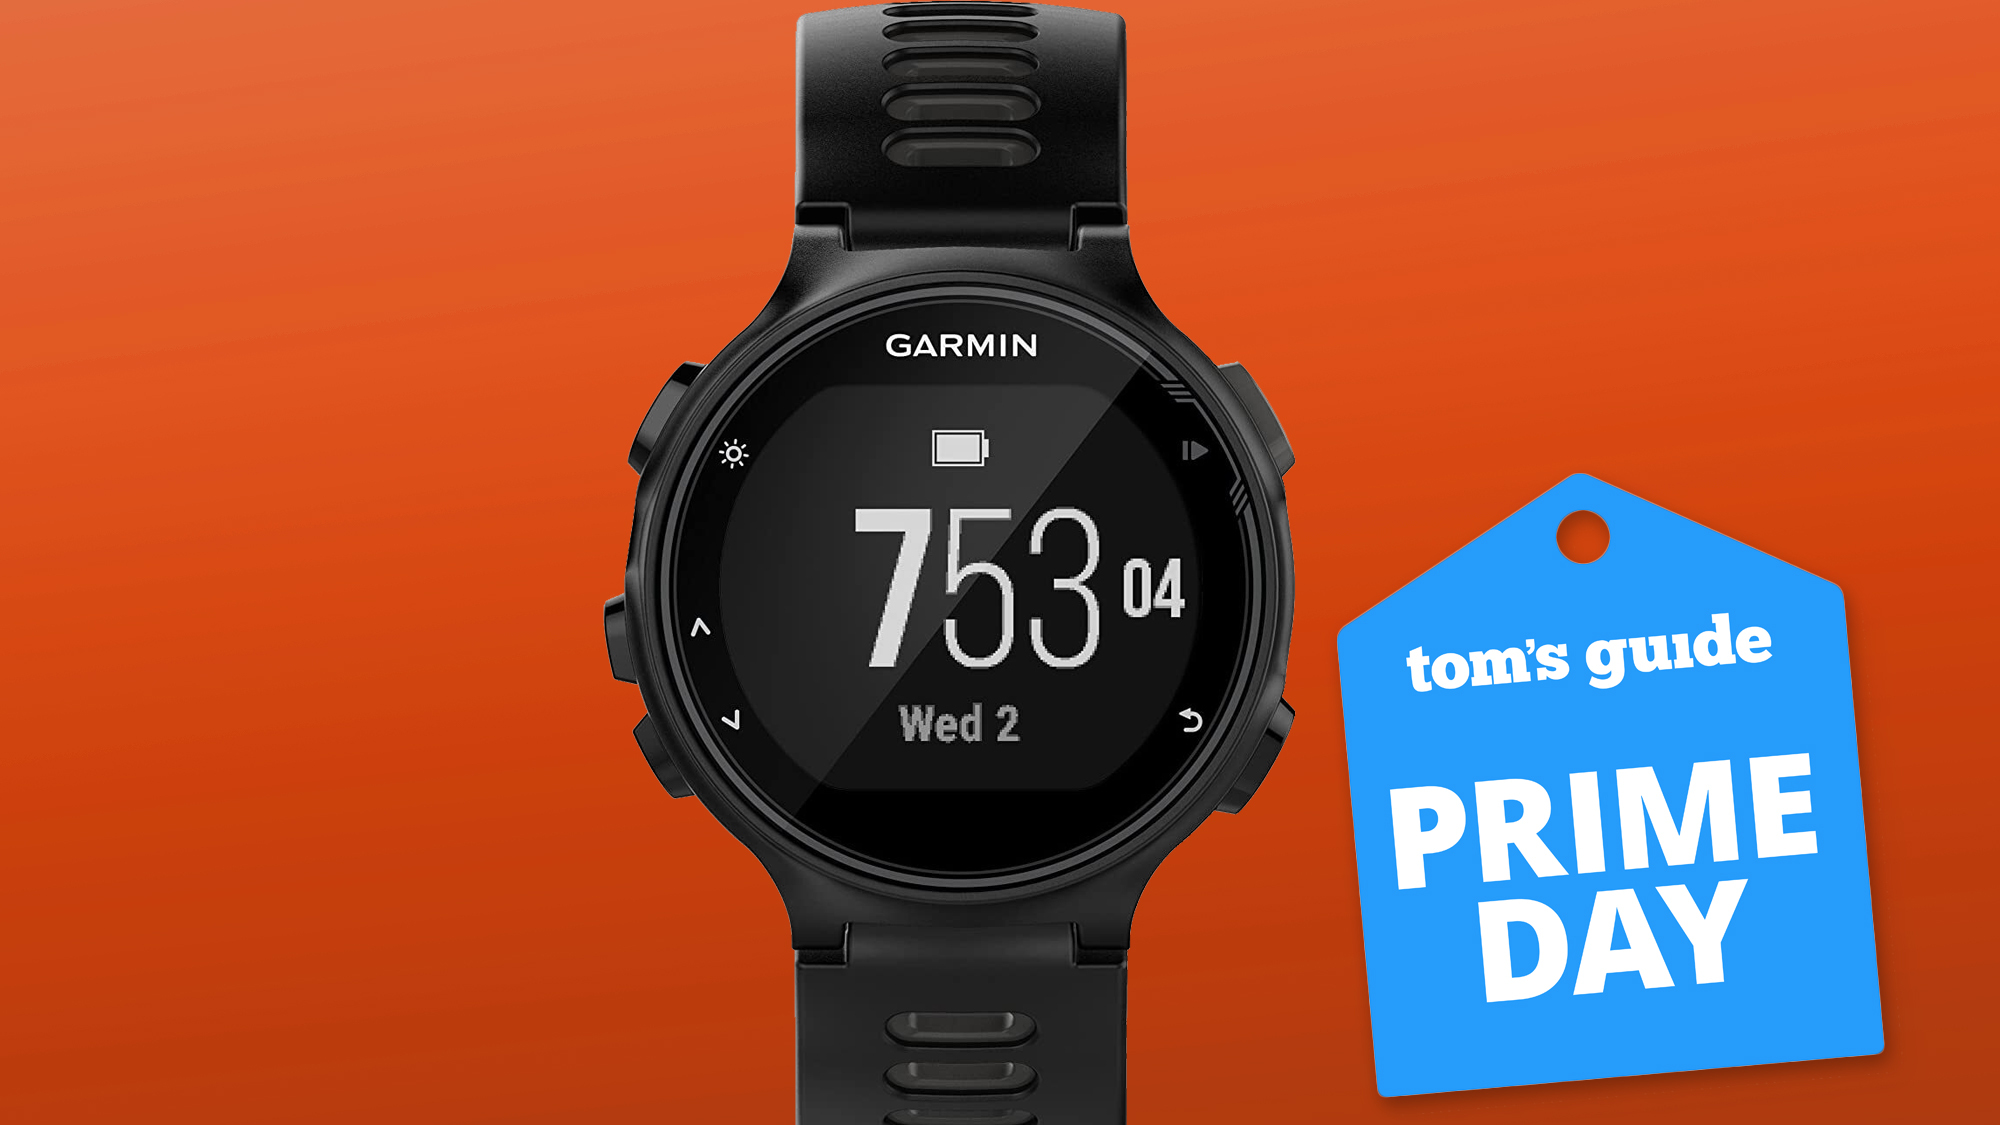 Pædagogik satellit talsmand Save $60 on the Garmin Forerunner 735XT GPS Running Watch with this Prime  Day deal | Tom's Guide